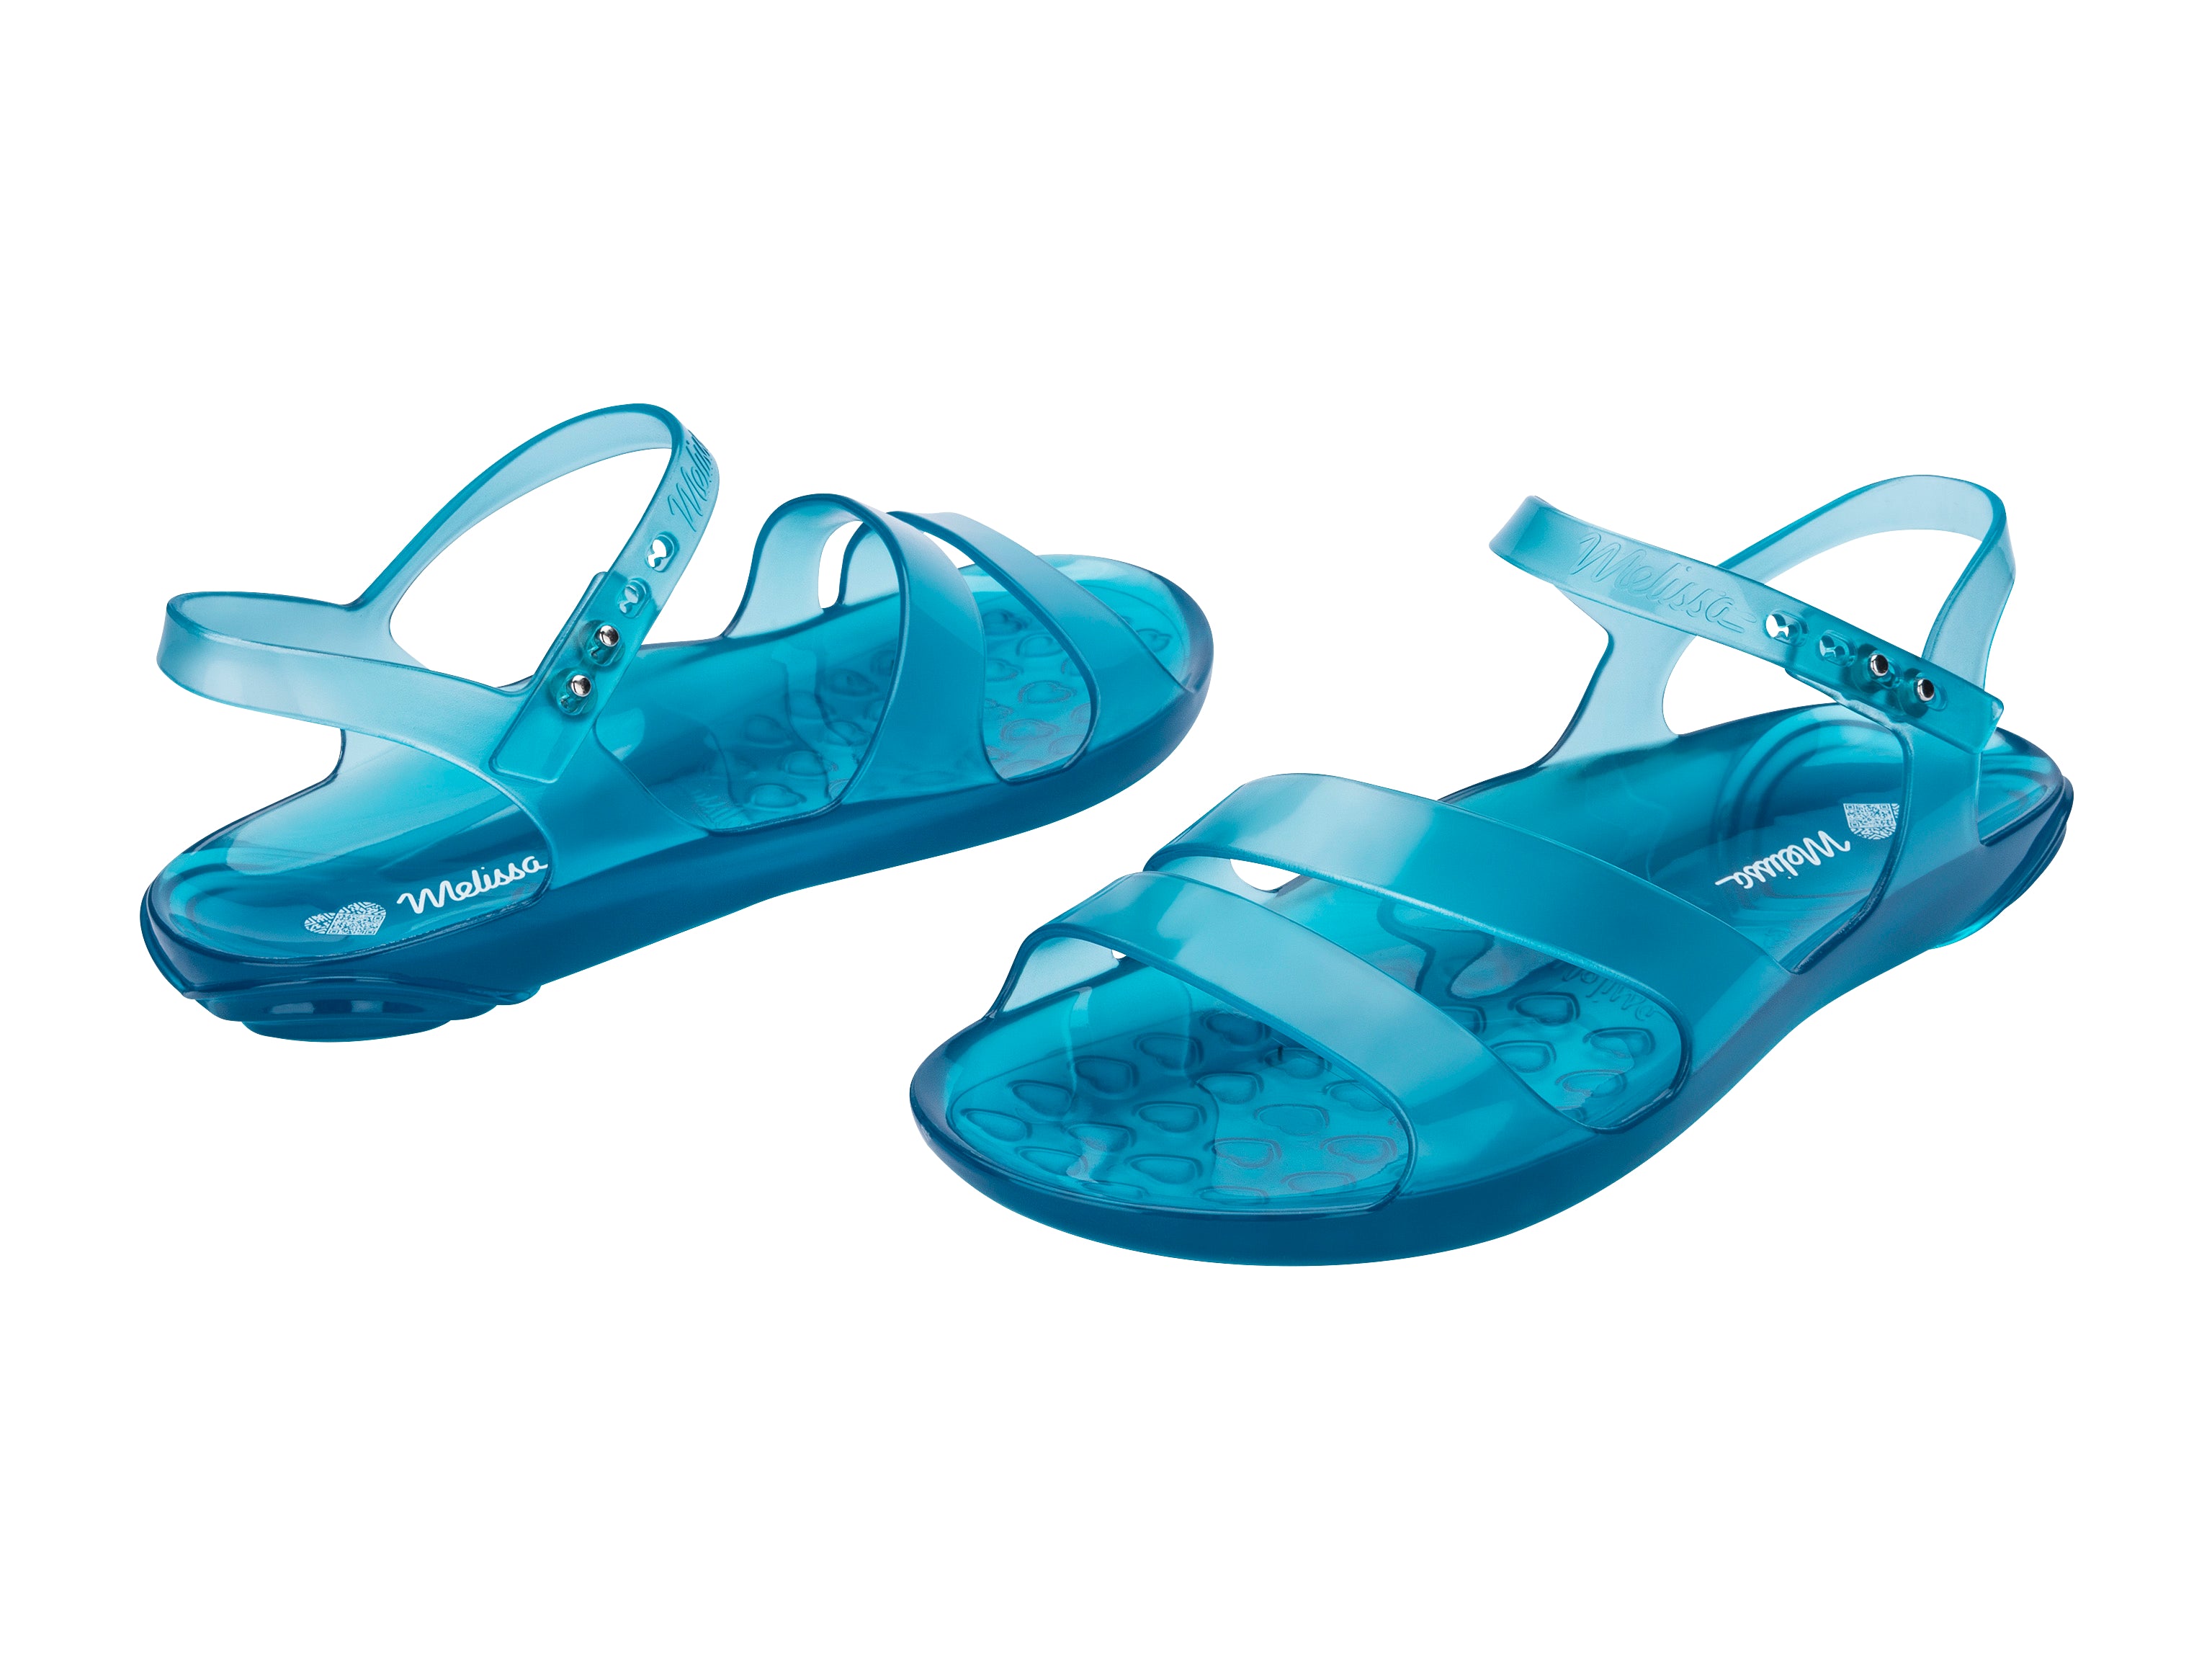 The Real Jelly Sandal - Bleue